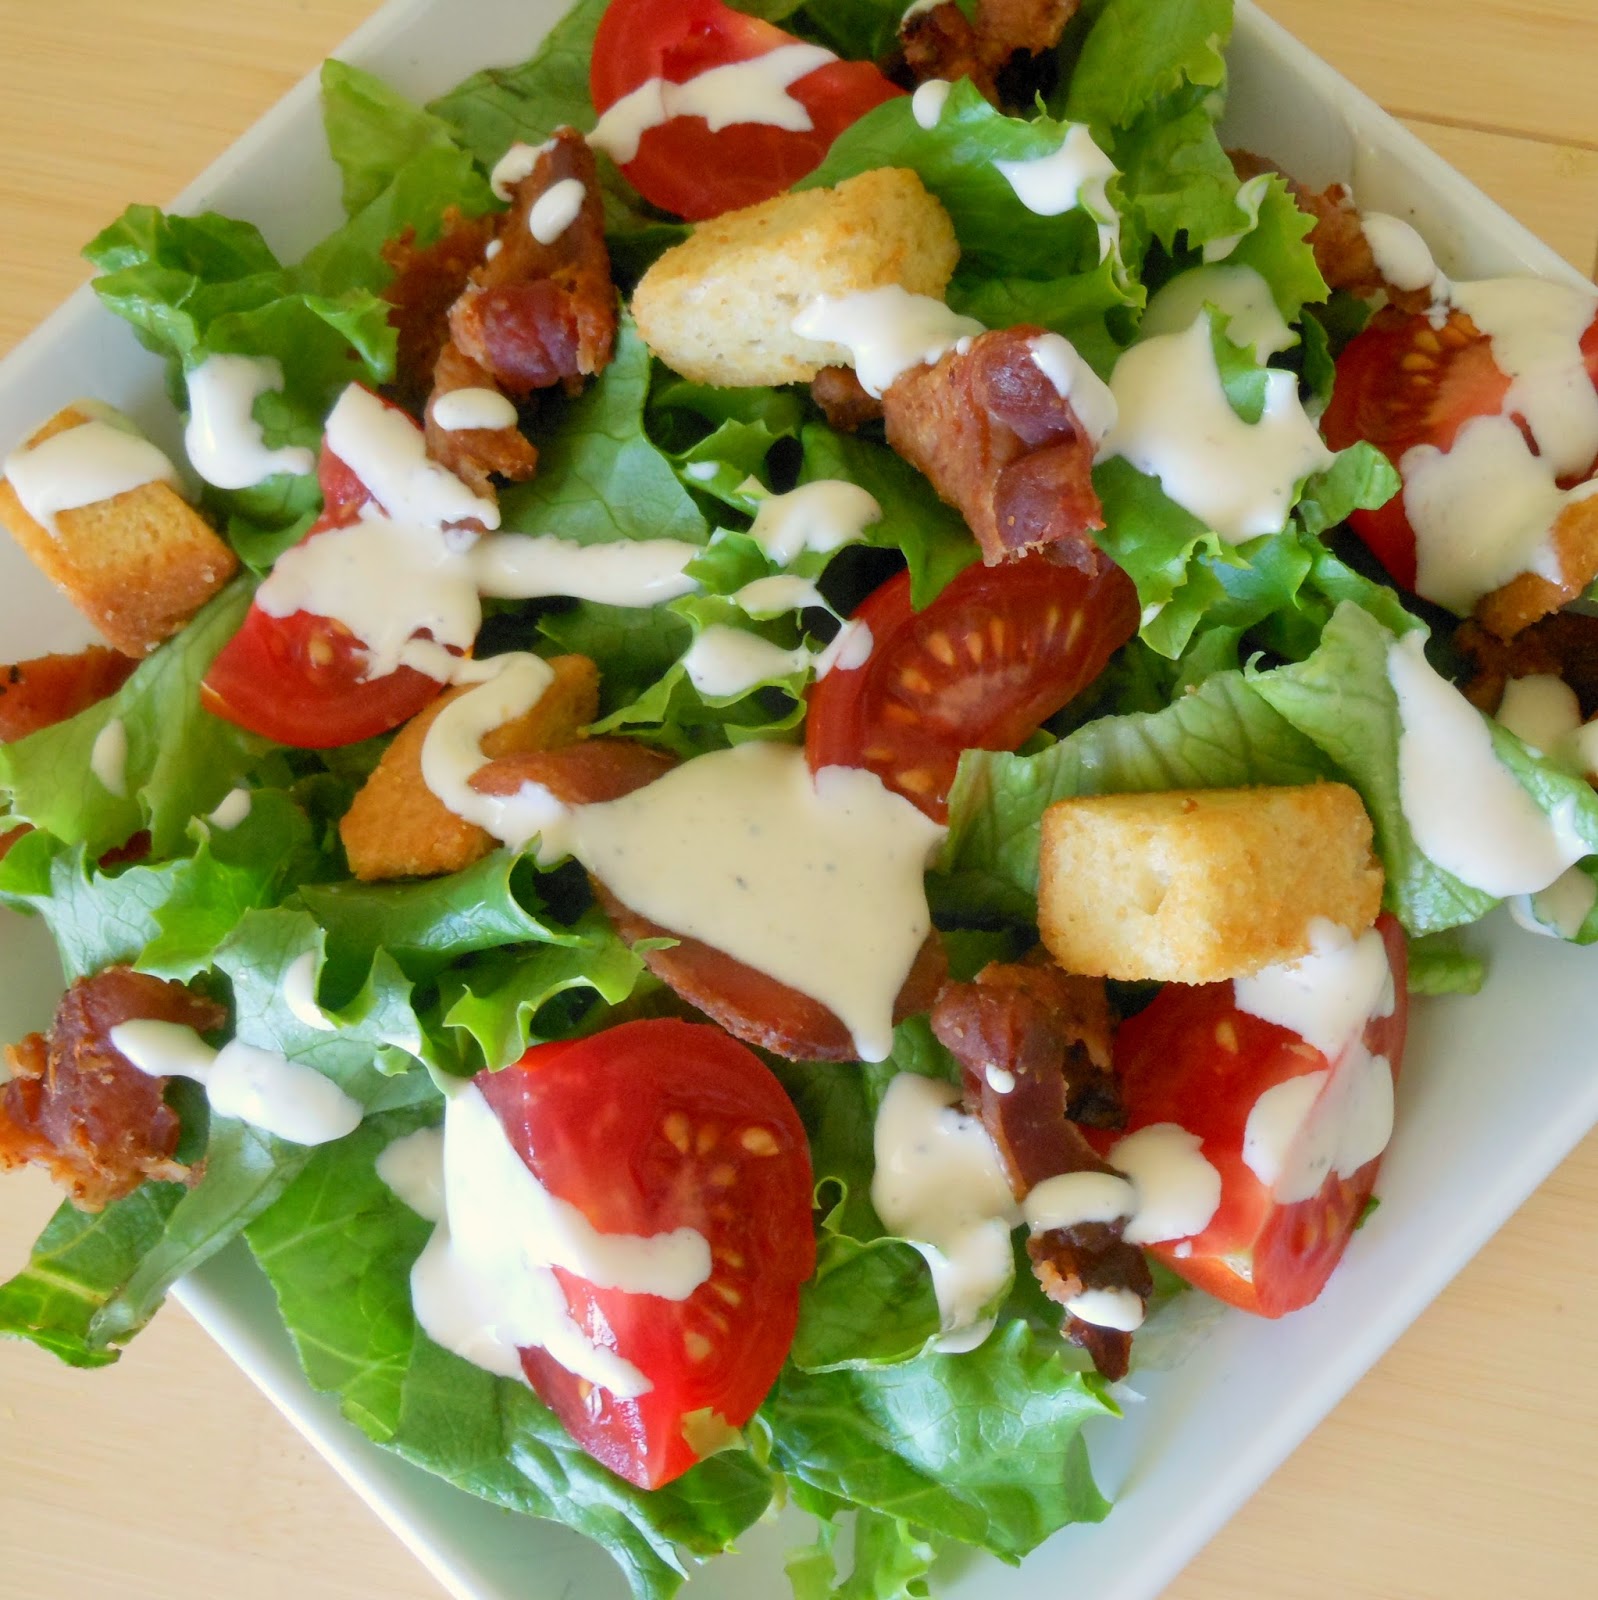 Sunny Days With My Loves - Adventures in Homemaking: Simple BLT Salad